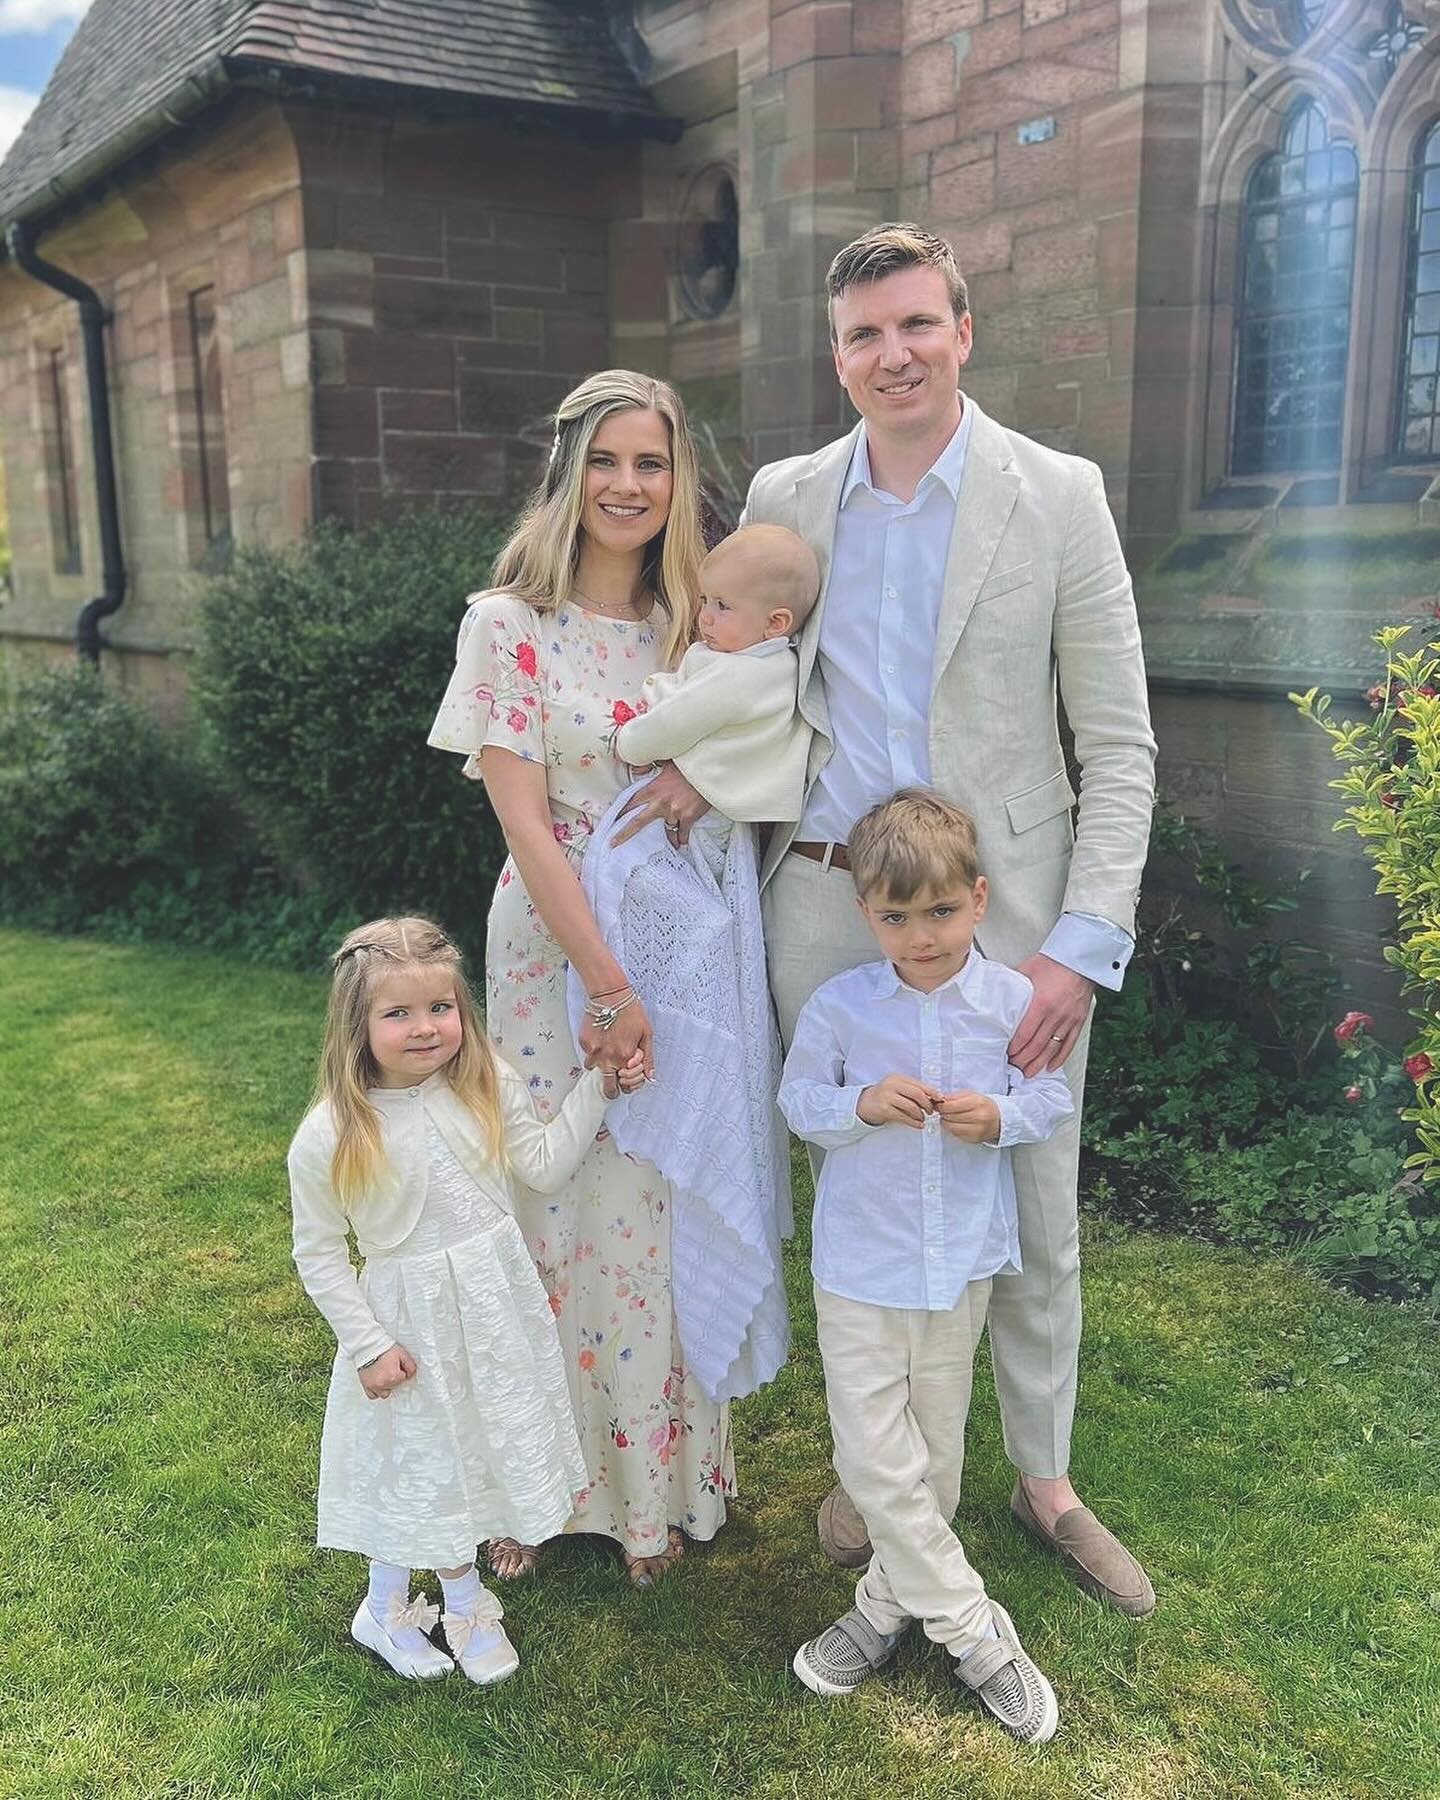 Our bestselling Rose fluted sleeve floor length dress in Prairie print, worn to Springtime perfection by our ultimate #adamuse @daniellemariamills for her family christening.
&bull;
&lsquo;Just want to send you the biggest thank you. The dress was pe